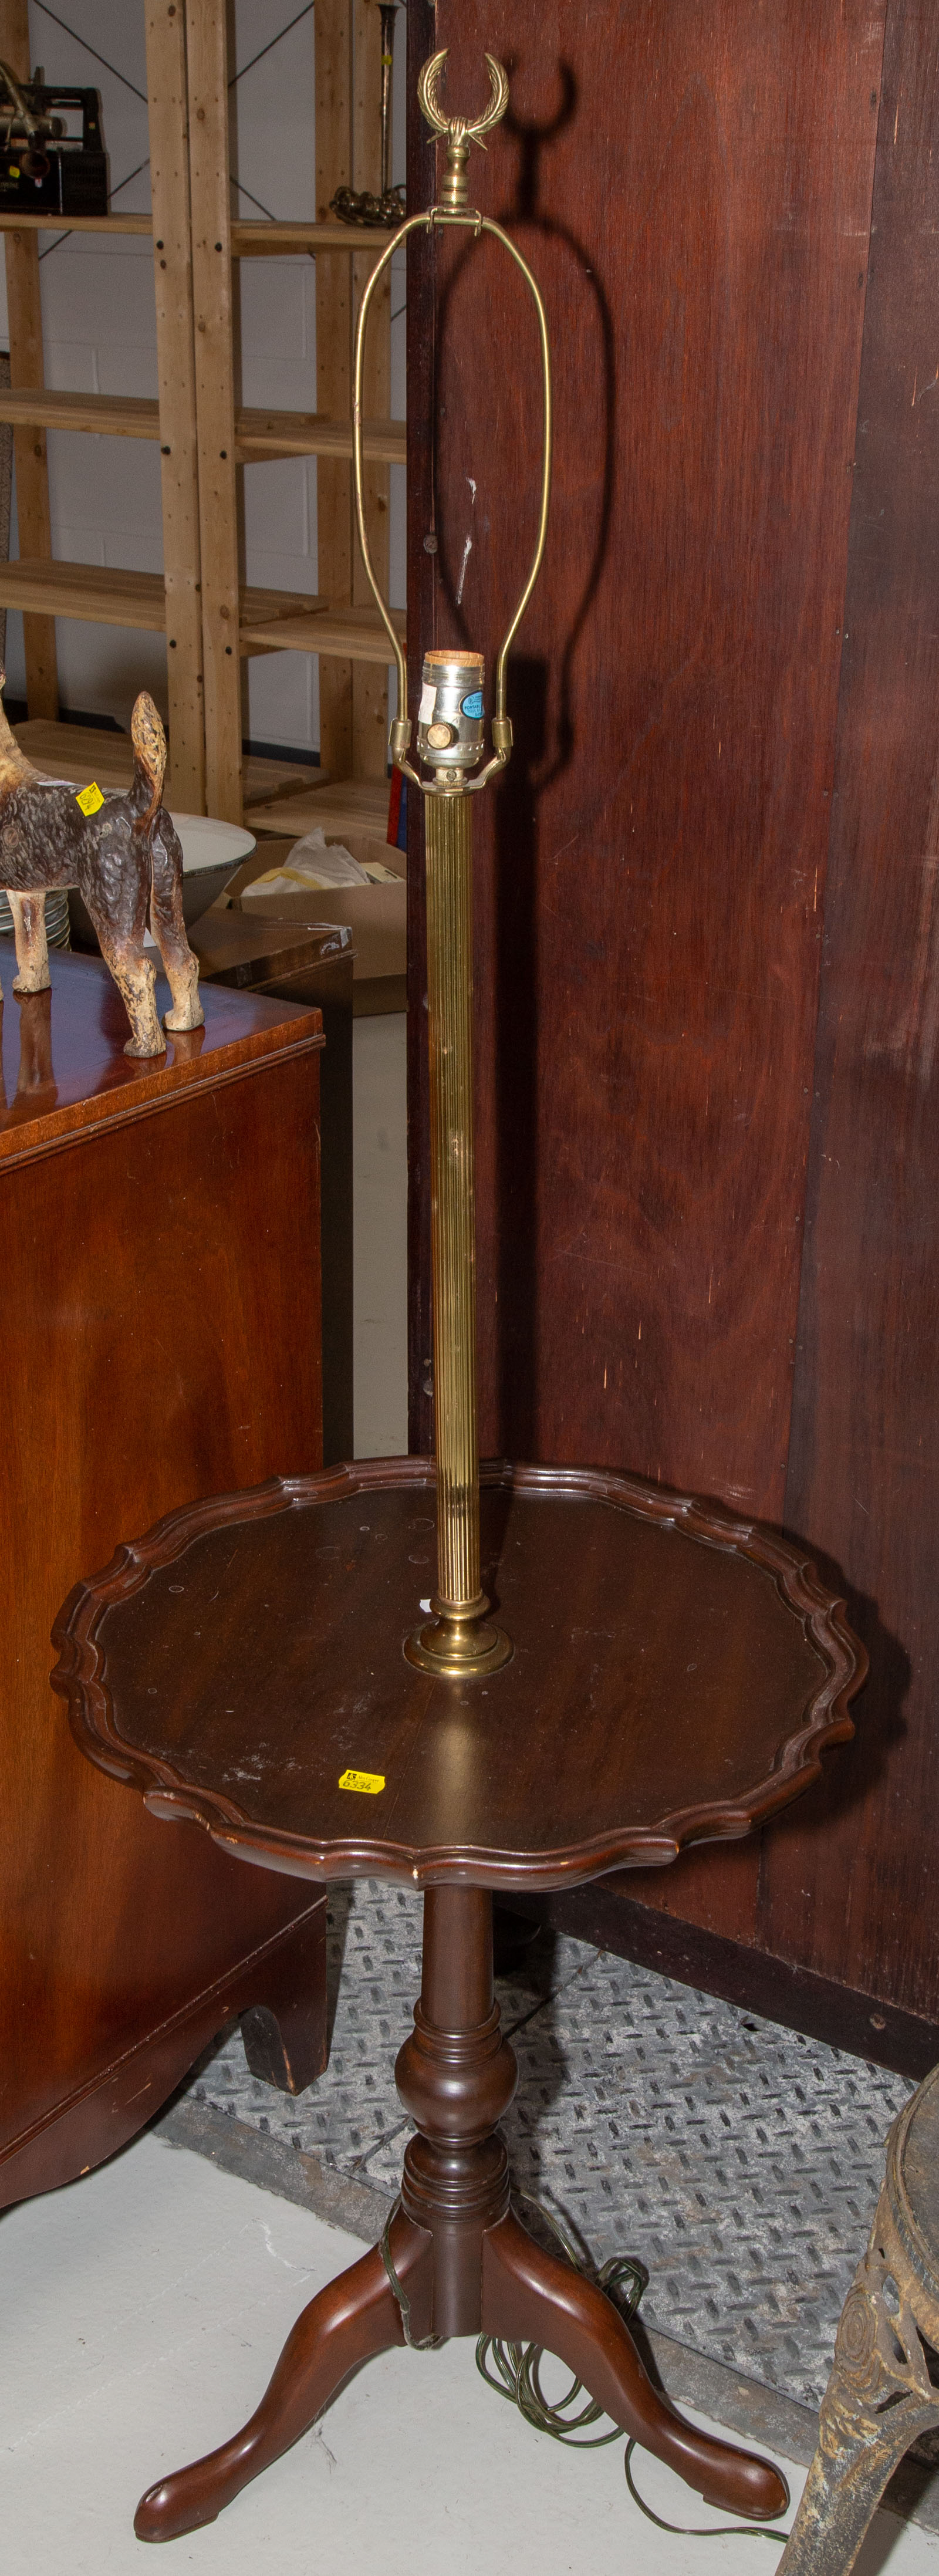 QUEEN ANNE STYLE FLOOR LAMP TABLE